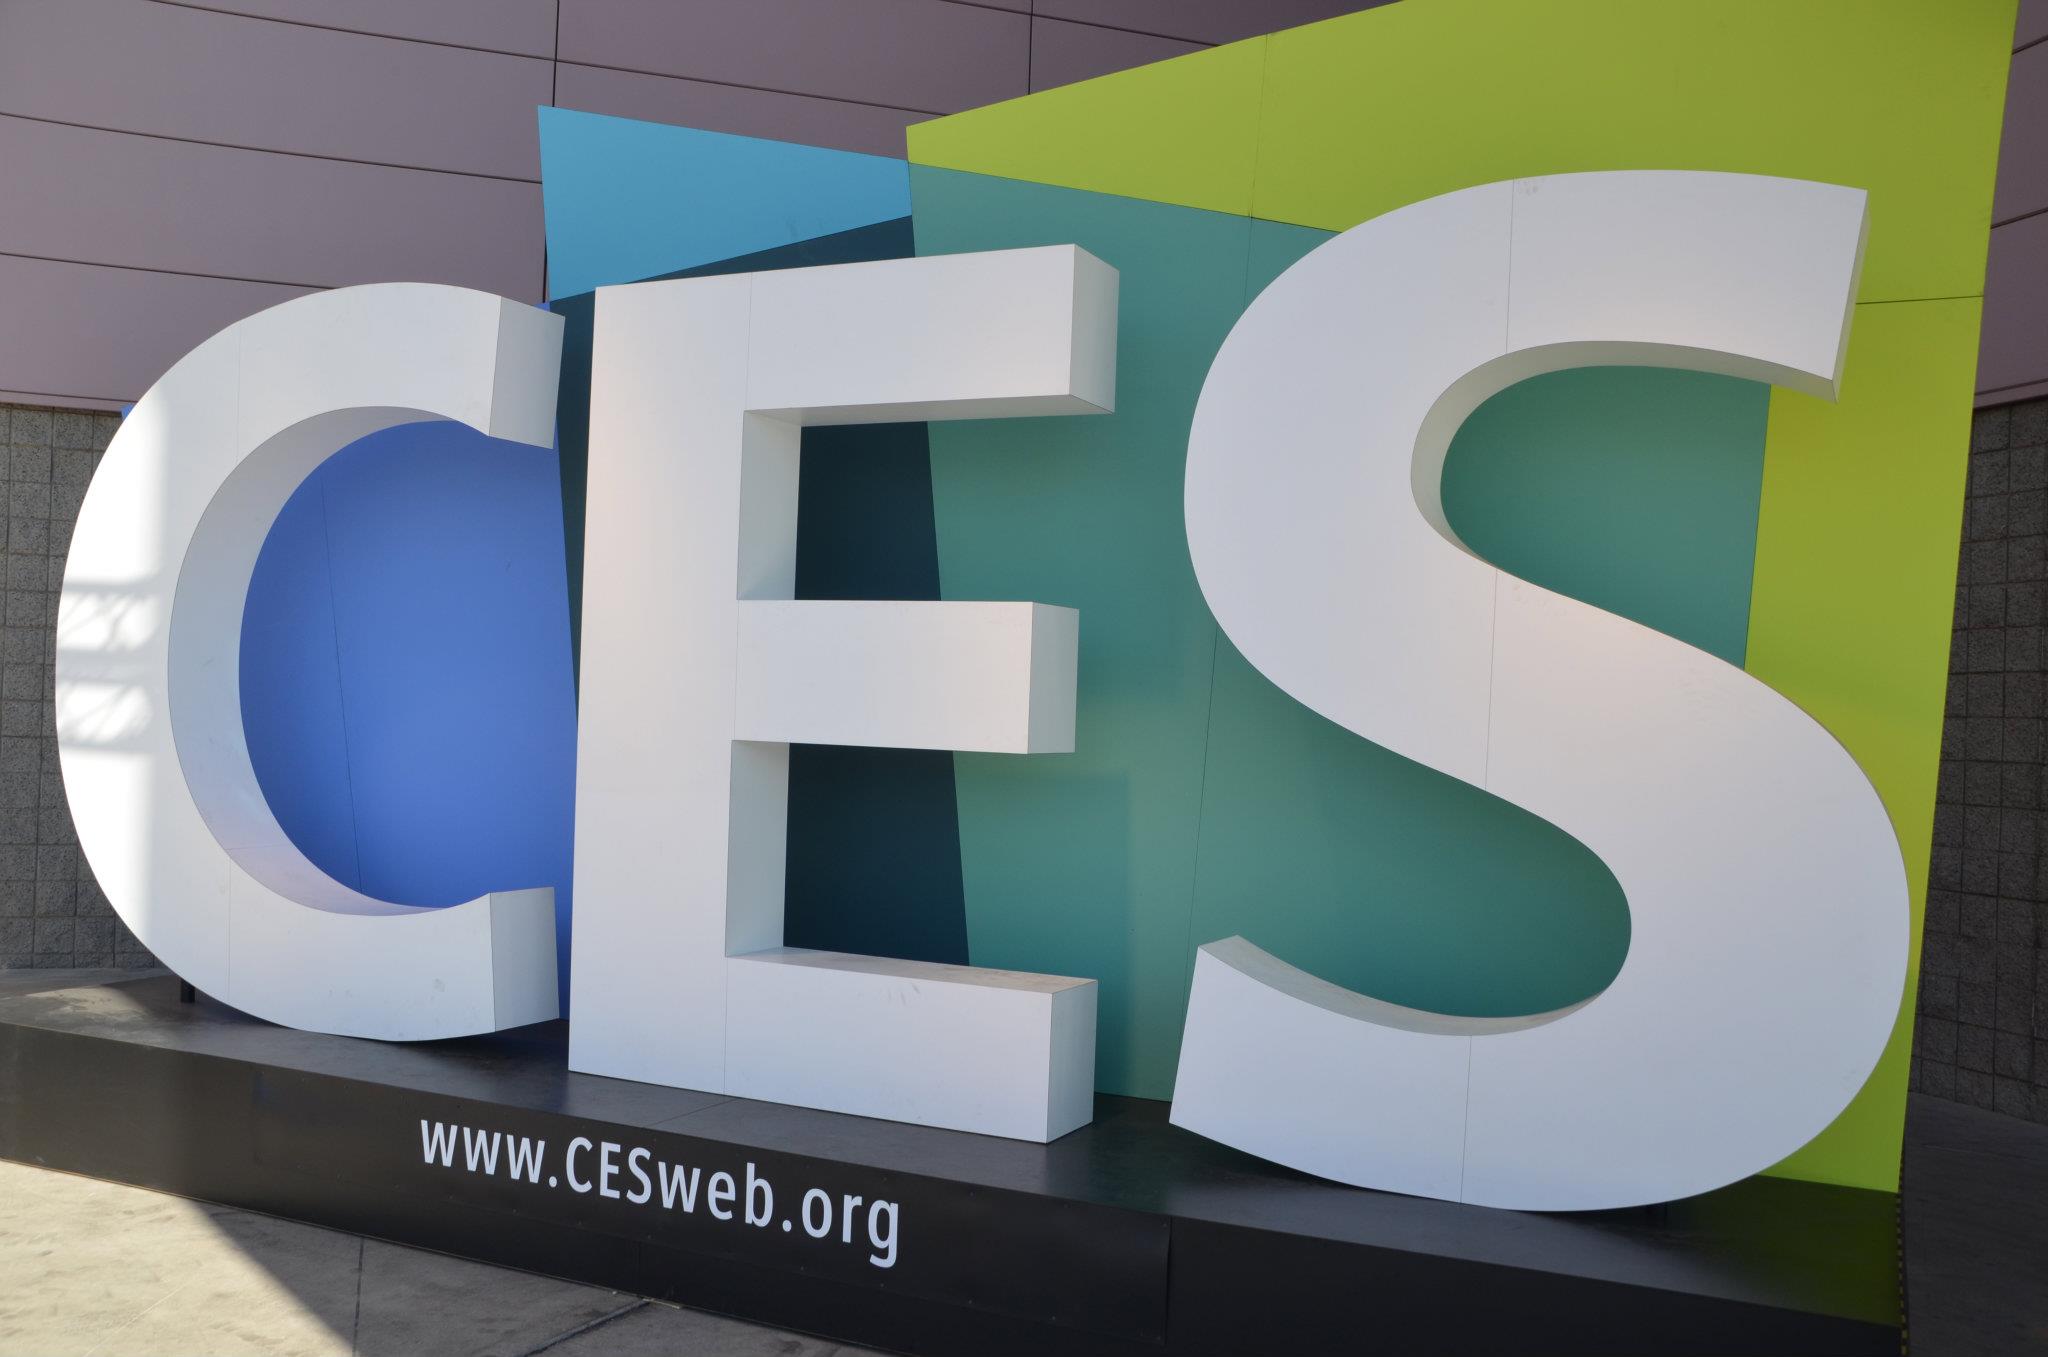 Move Over E3, Gaming Takes a Bigger Role at CES 2014